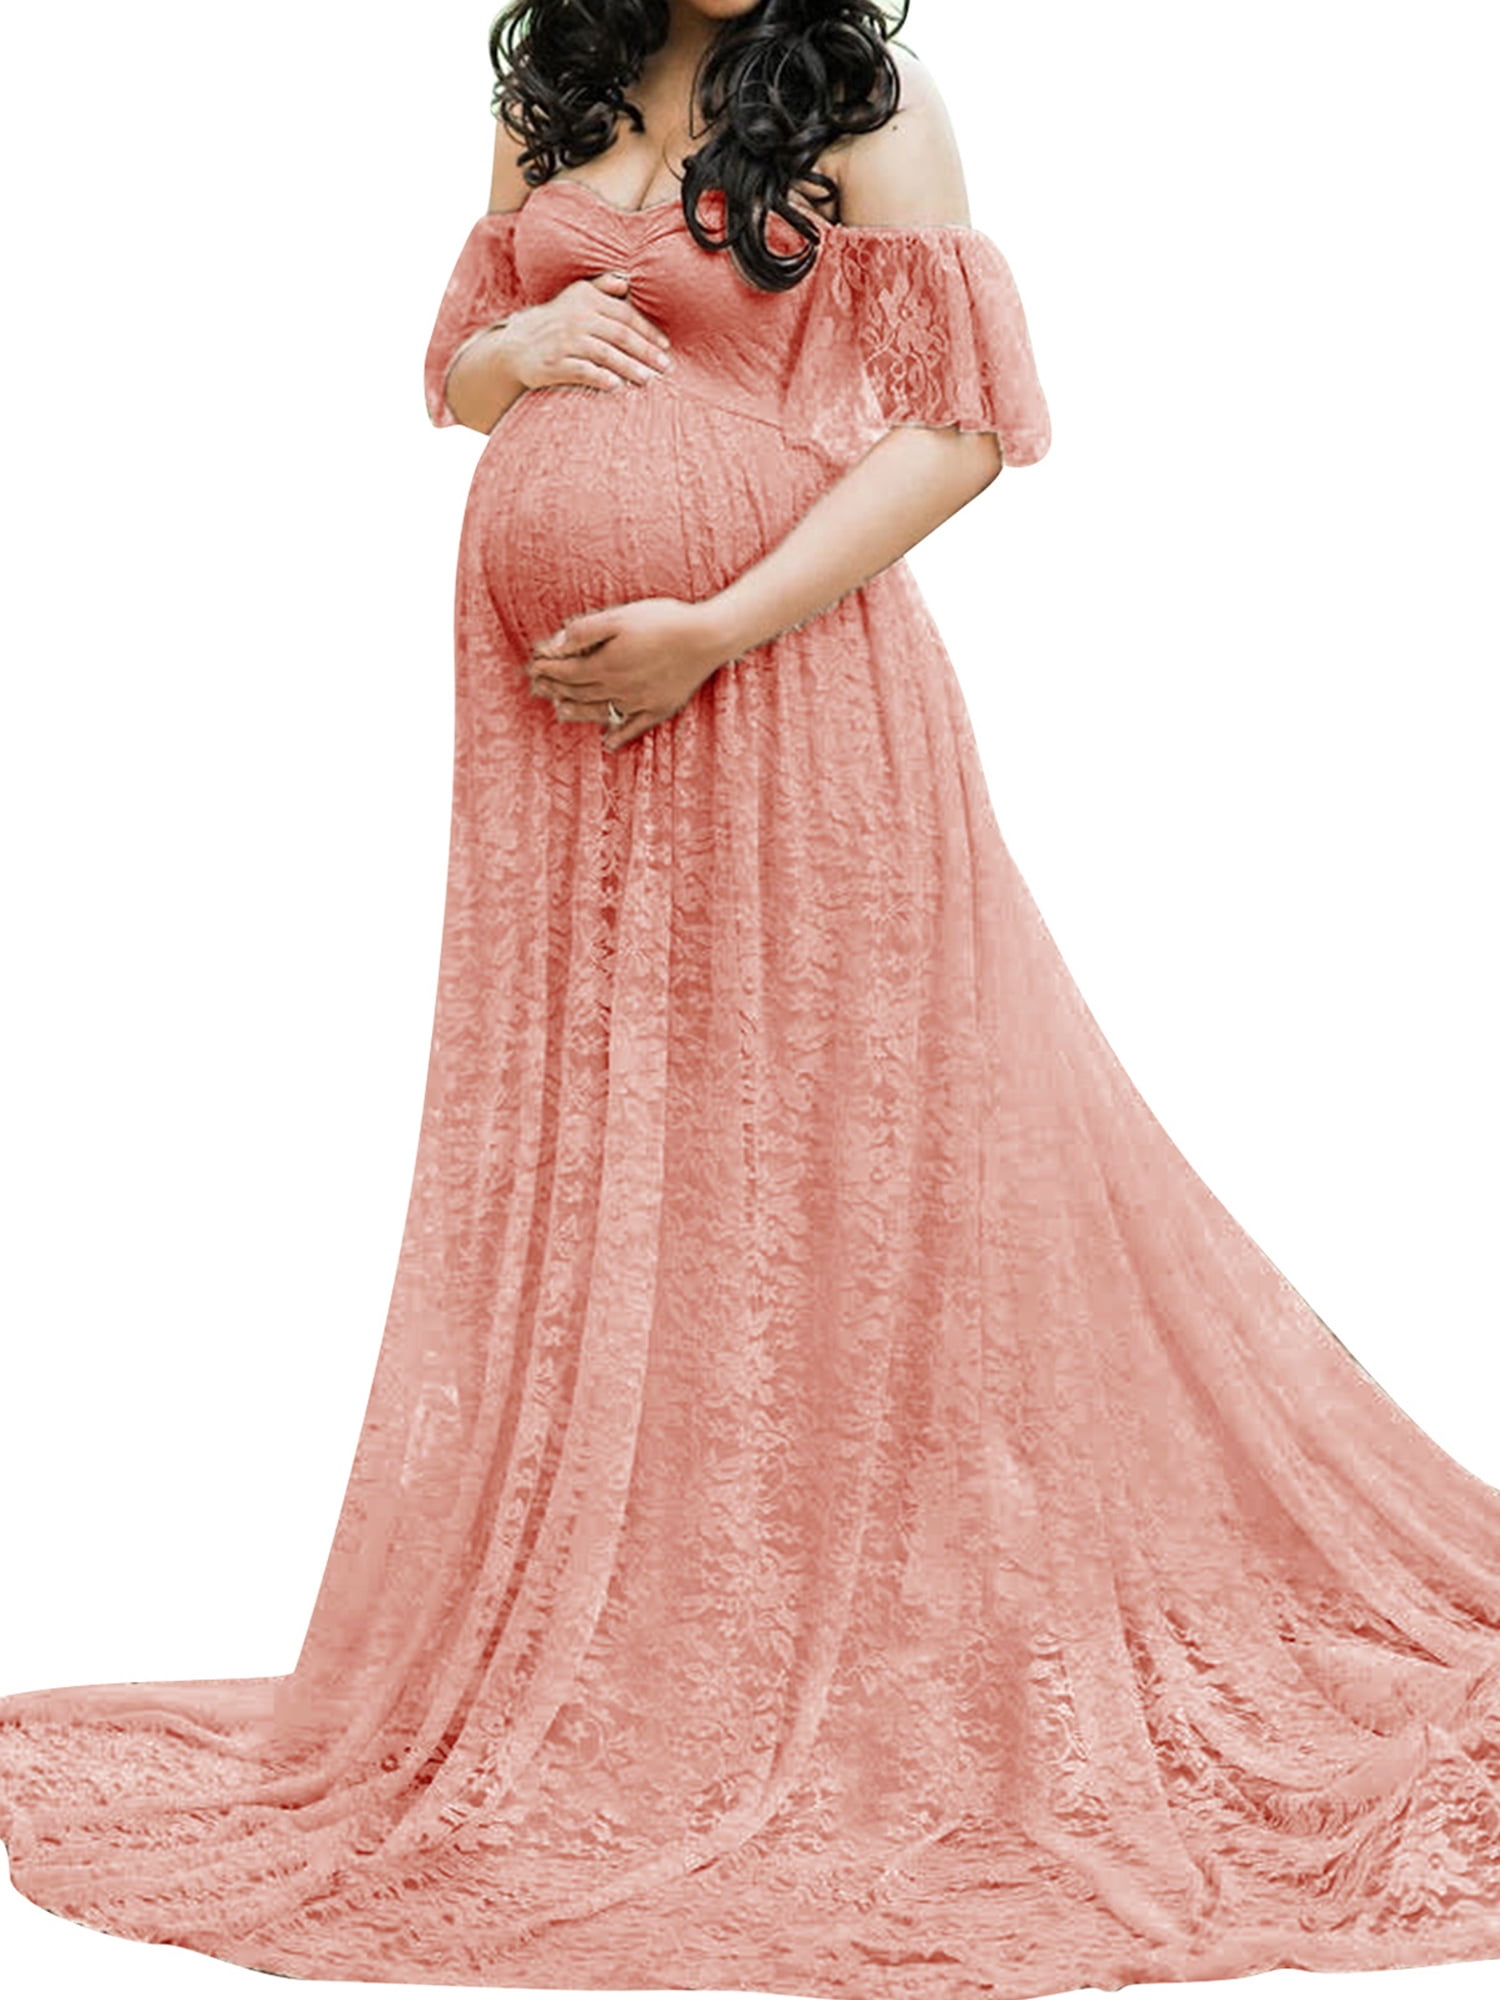 Pregnant Women's Lace Floral Dress Off Shoulder Maternity Gown Photography Shoot 